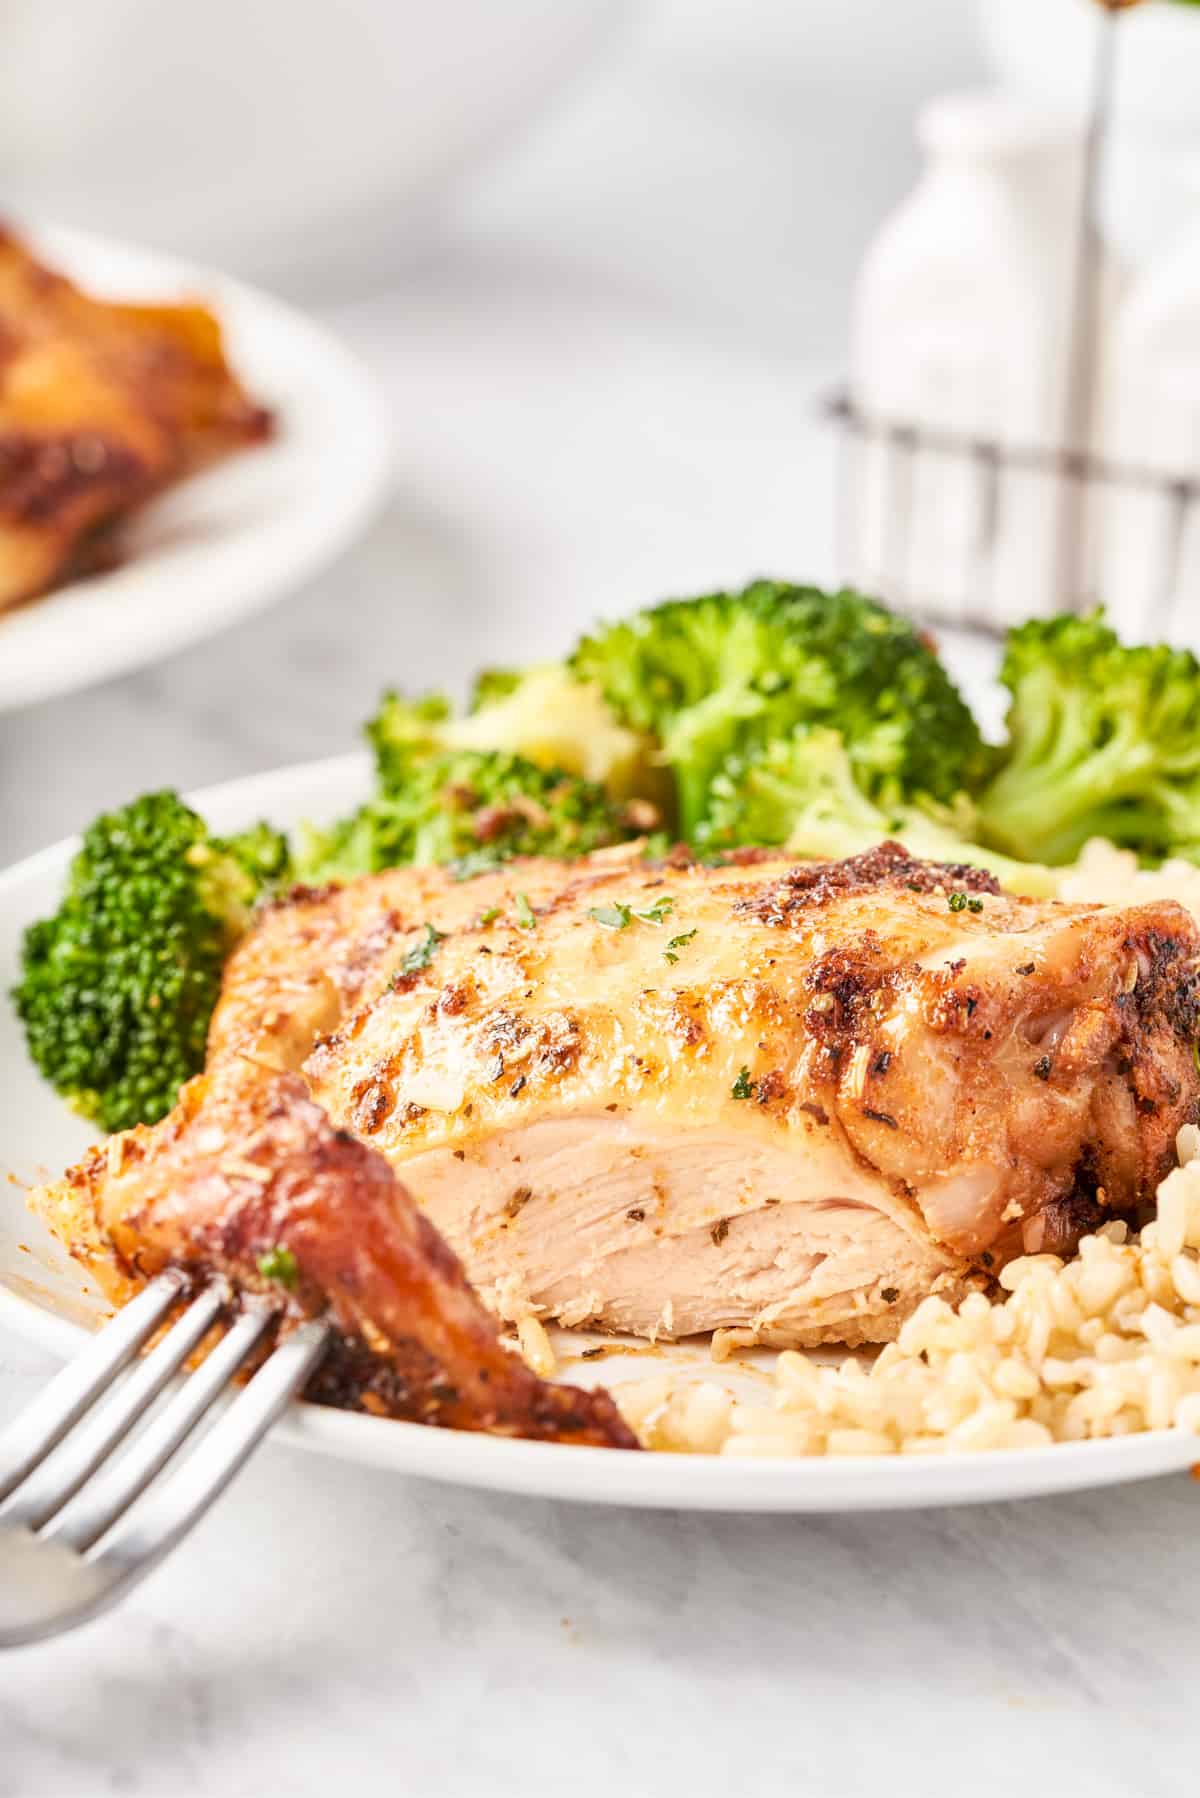 One chicken thigh on white plate with rice and broccoli cut open showing cooked inside.